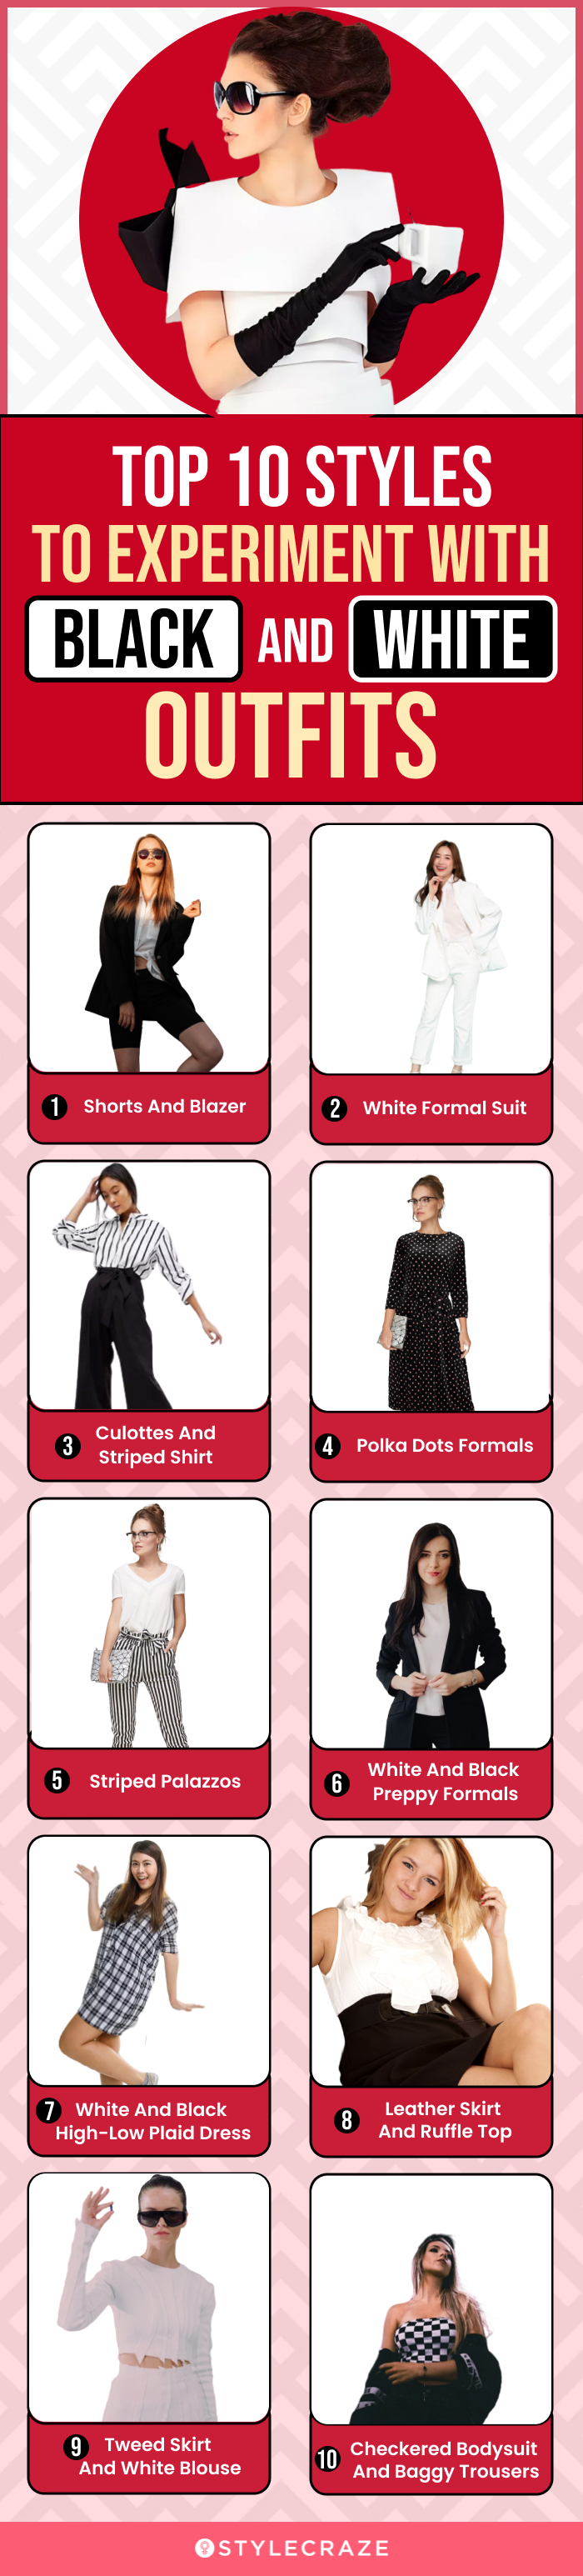 top 10 styles to experiment with black and white outfits (infographic)